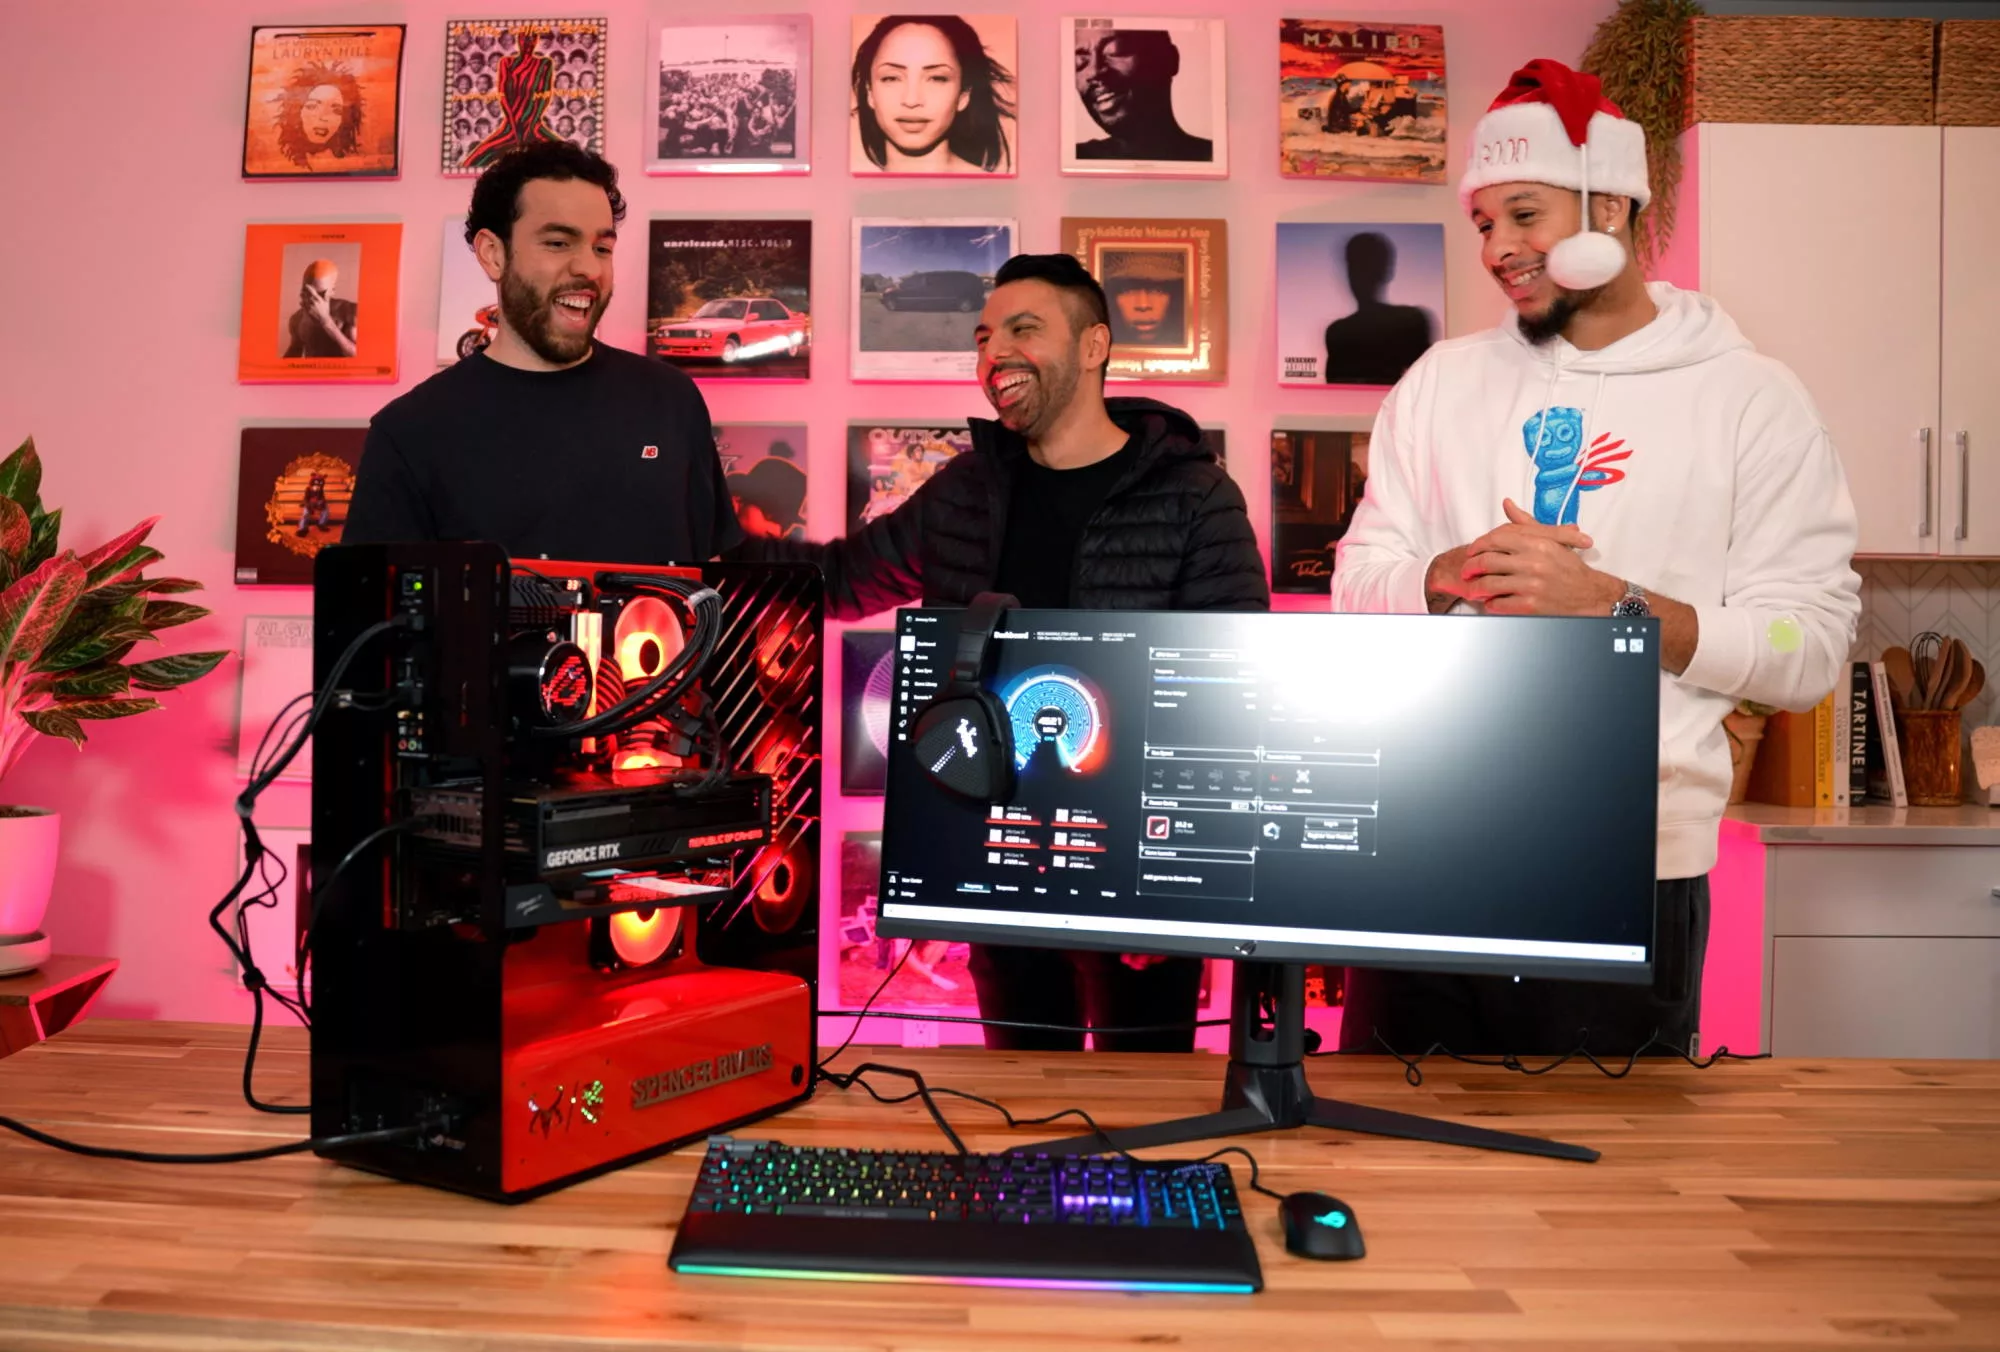 Seth, Ben, and Spencer all admire the finished and running gaming PC build